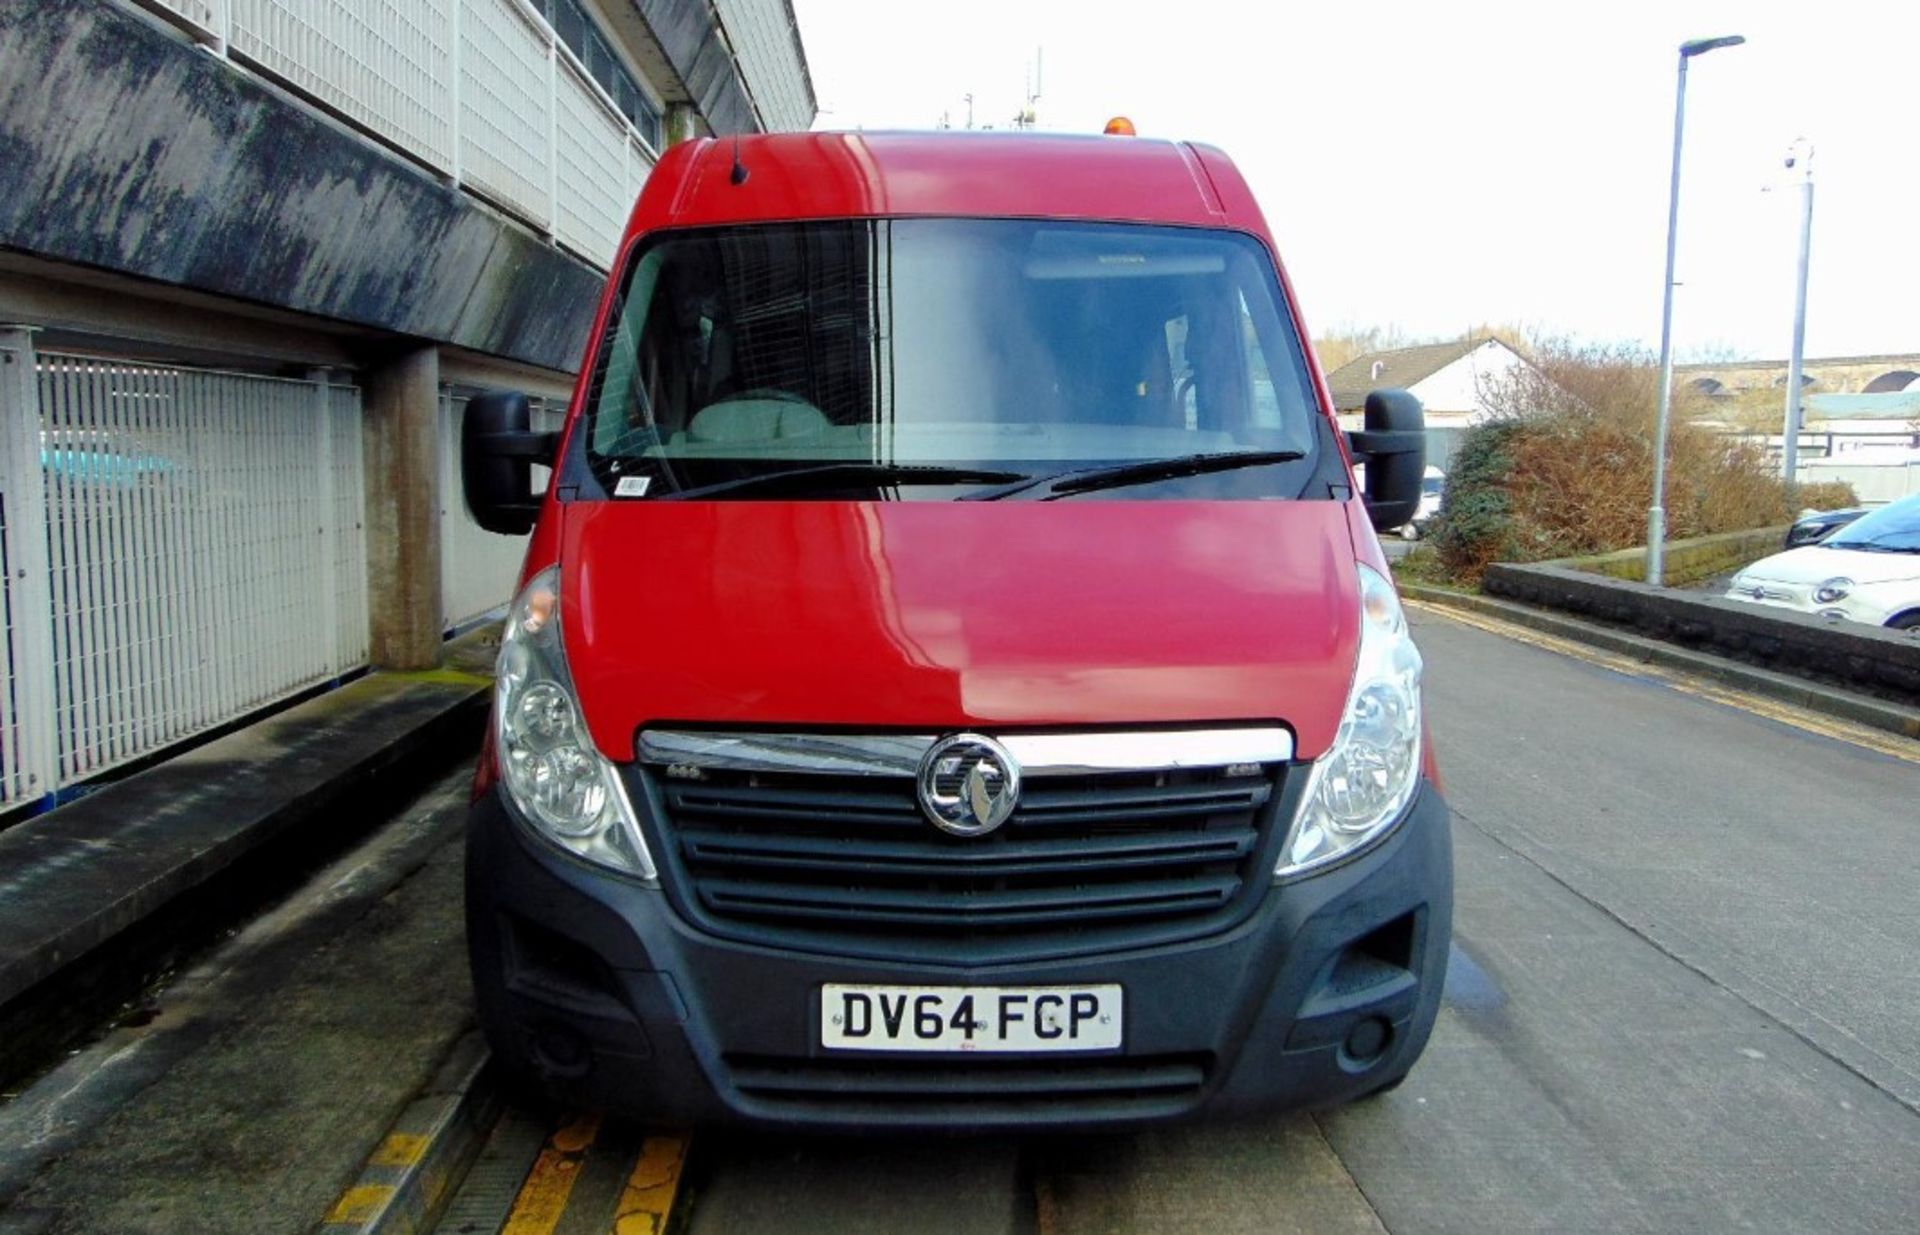 2014 VAUXHALL MOVANO LWB L3H2 WELFARE VAN - FULLY LOADED, READY FOR ANY JOB - Image 3 of 11